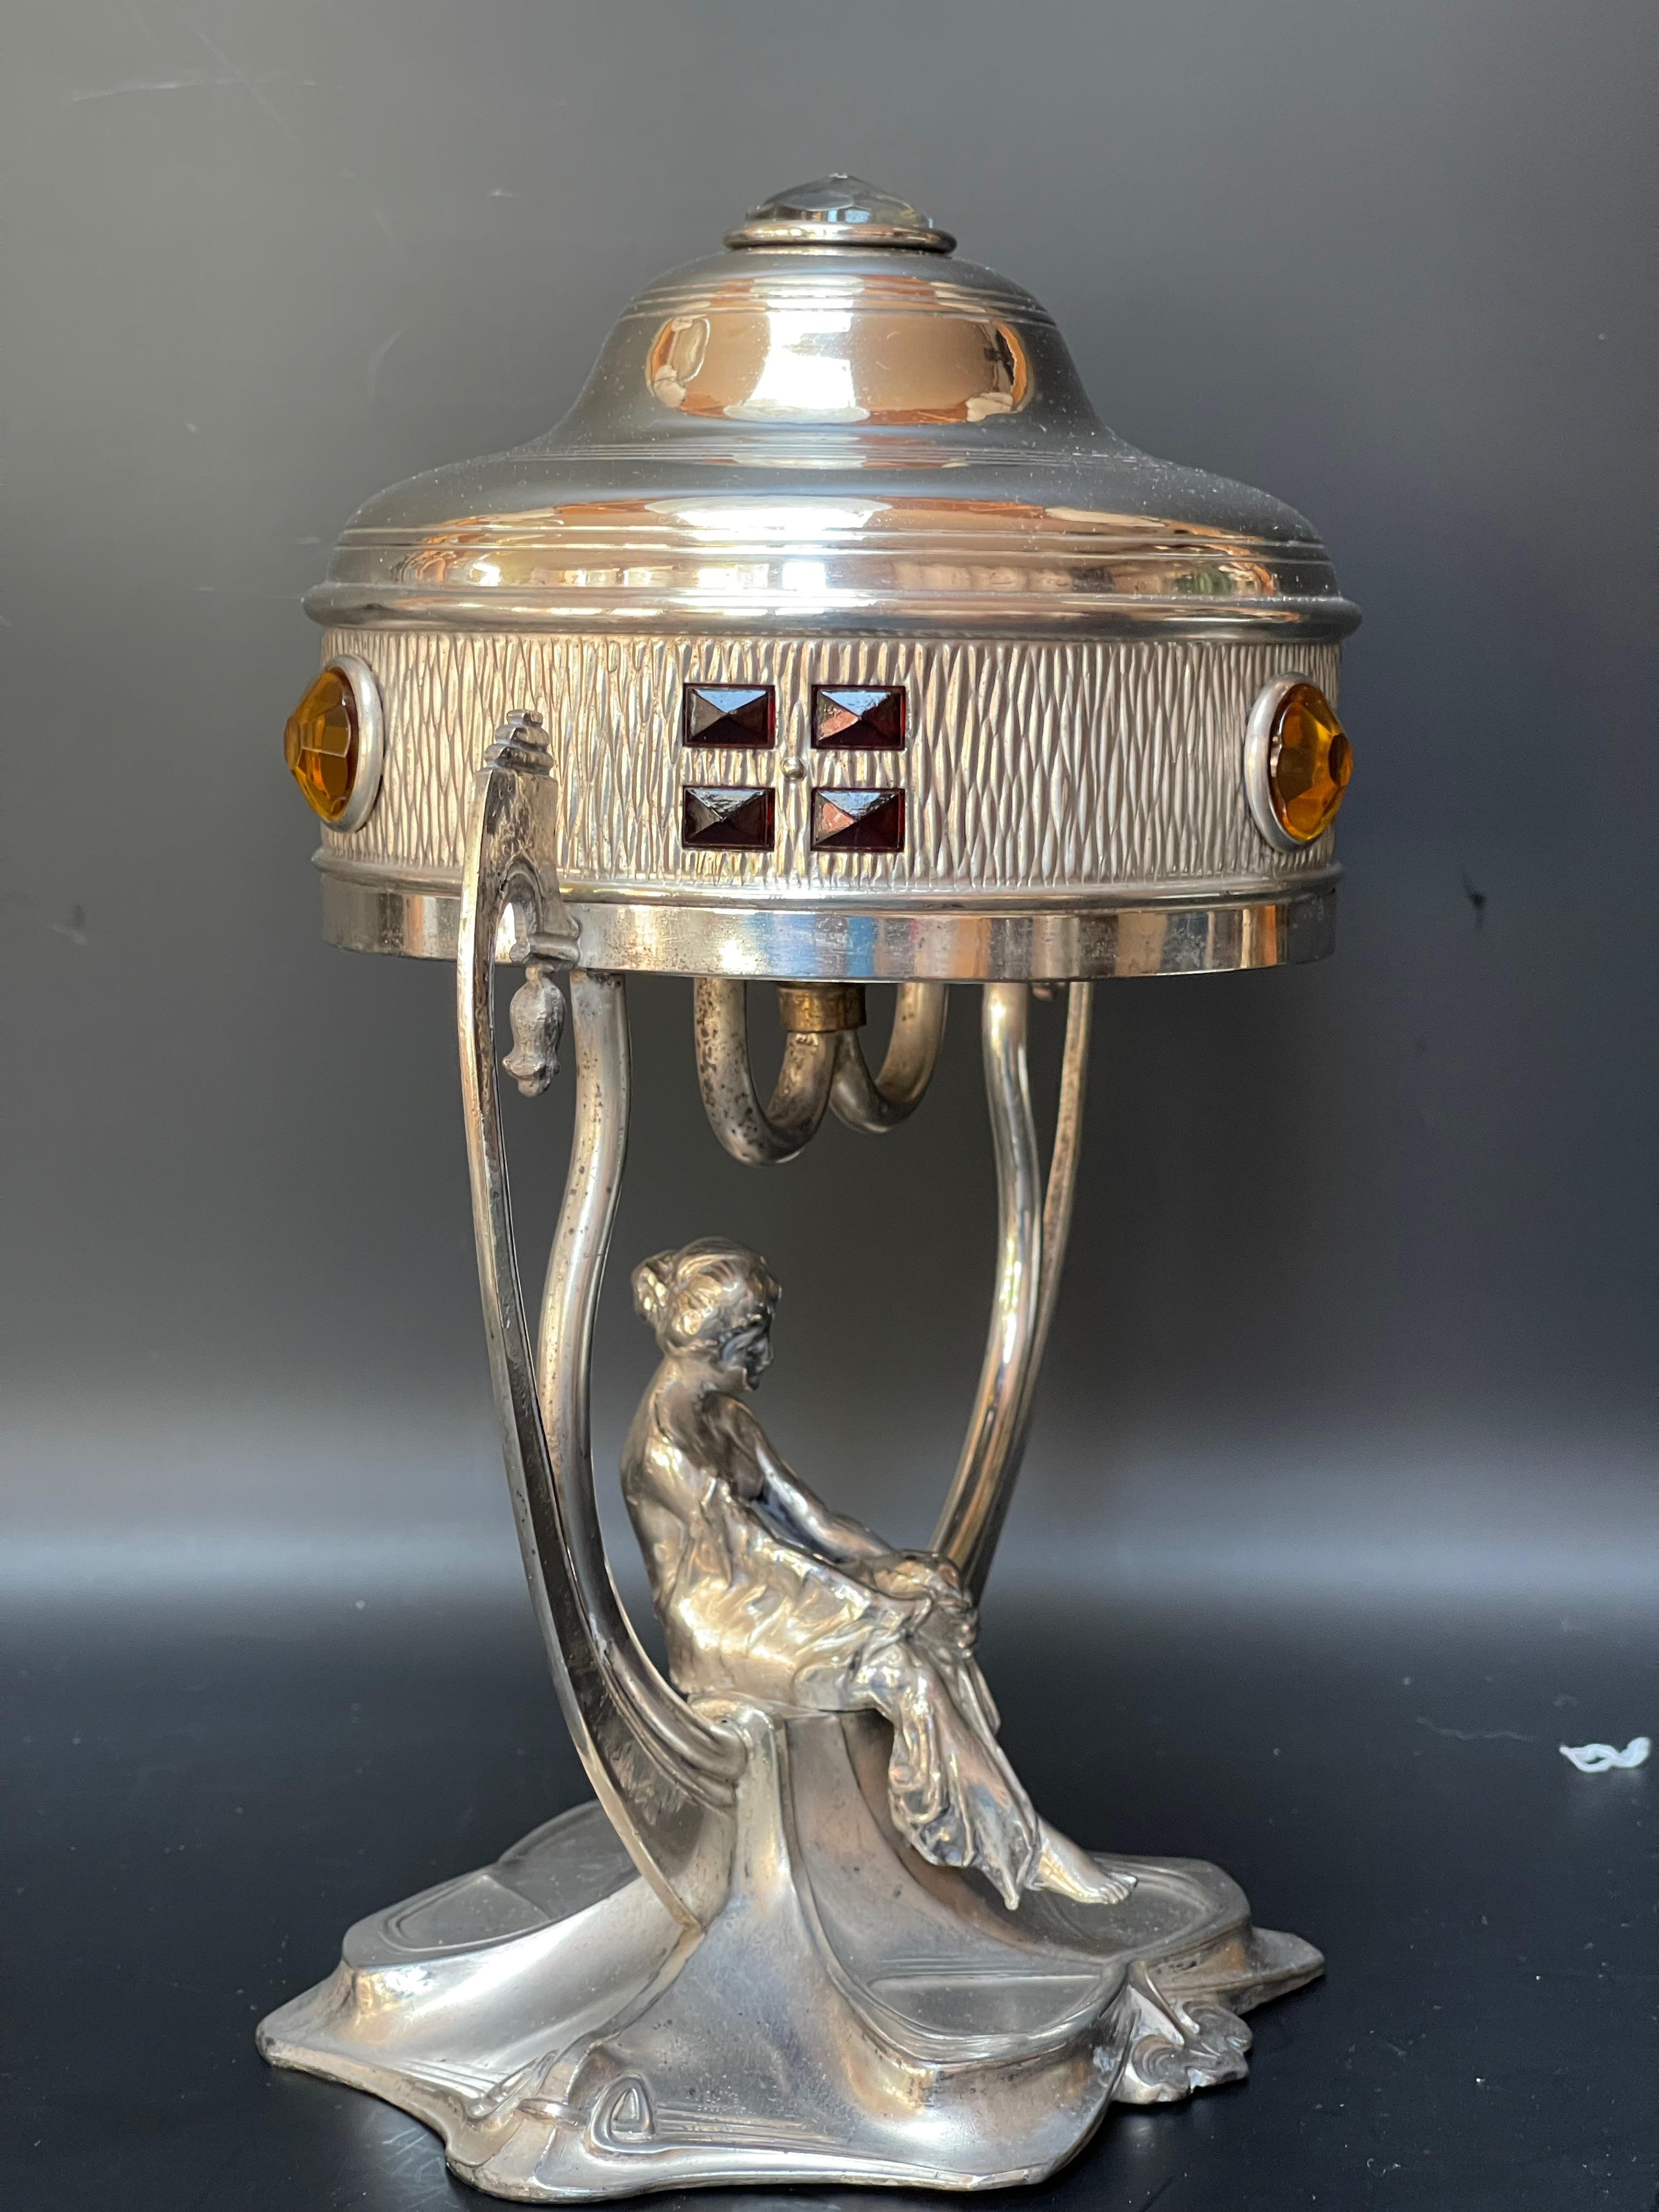 Art Nouveau night light around 1900.
Silver metal and glass cabochons.
Attributed to WMF.
Electrified and in very good condition

Width: 17 cm
Height: 28 cm
Depth: 14,5 cm
Weight: 1,3 Kg

WMF was originally called Metallwarenfabrik Straub